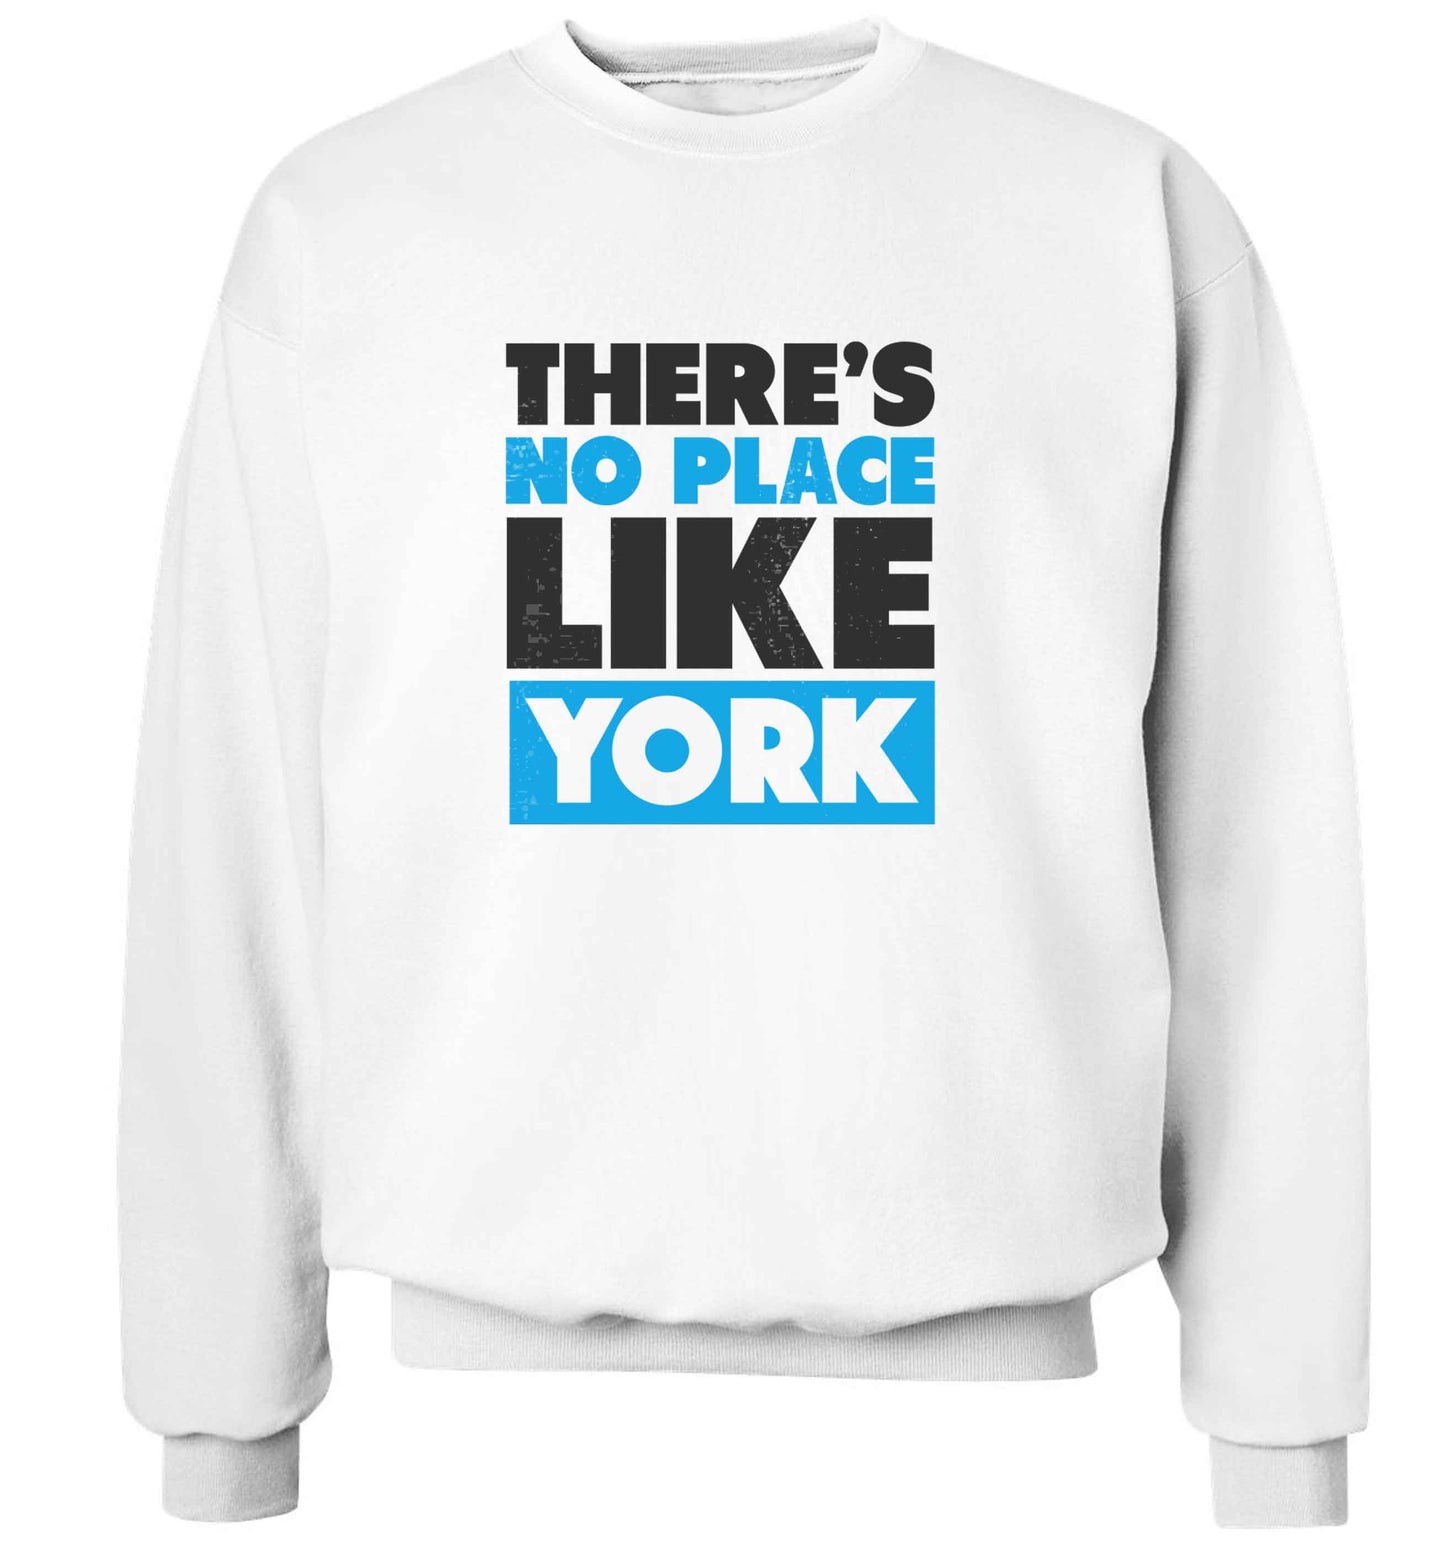 There's no place like york adult's unisex white sweater 2XL